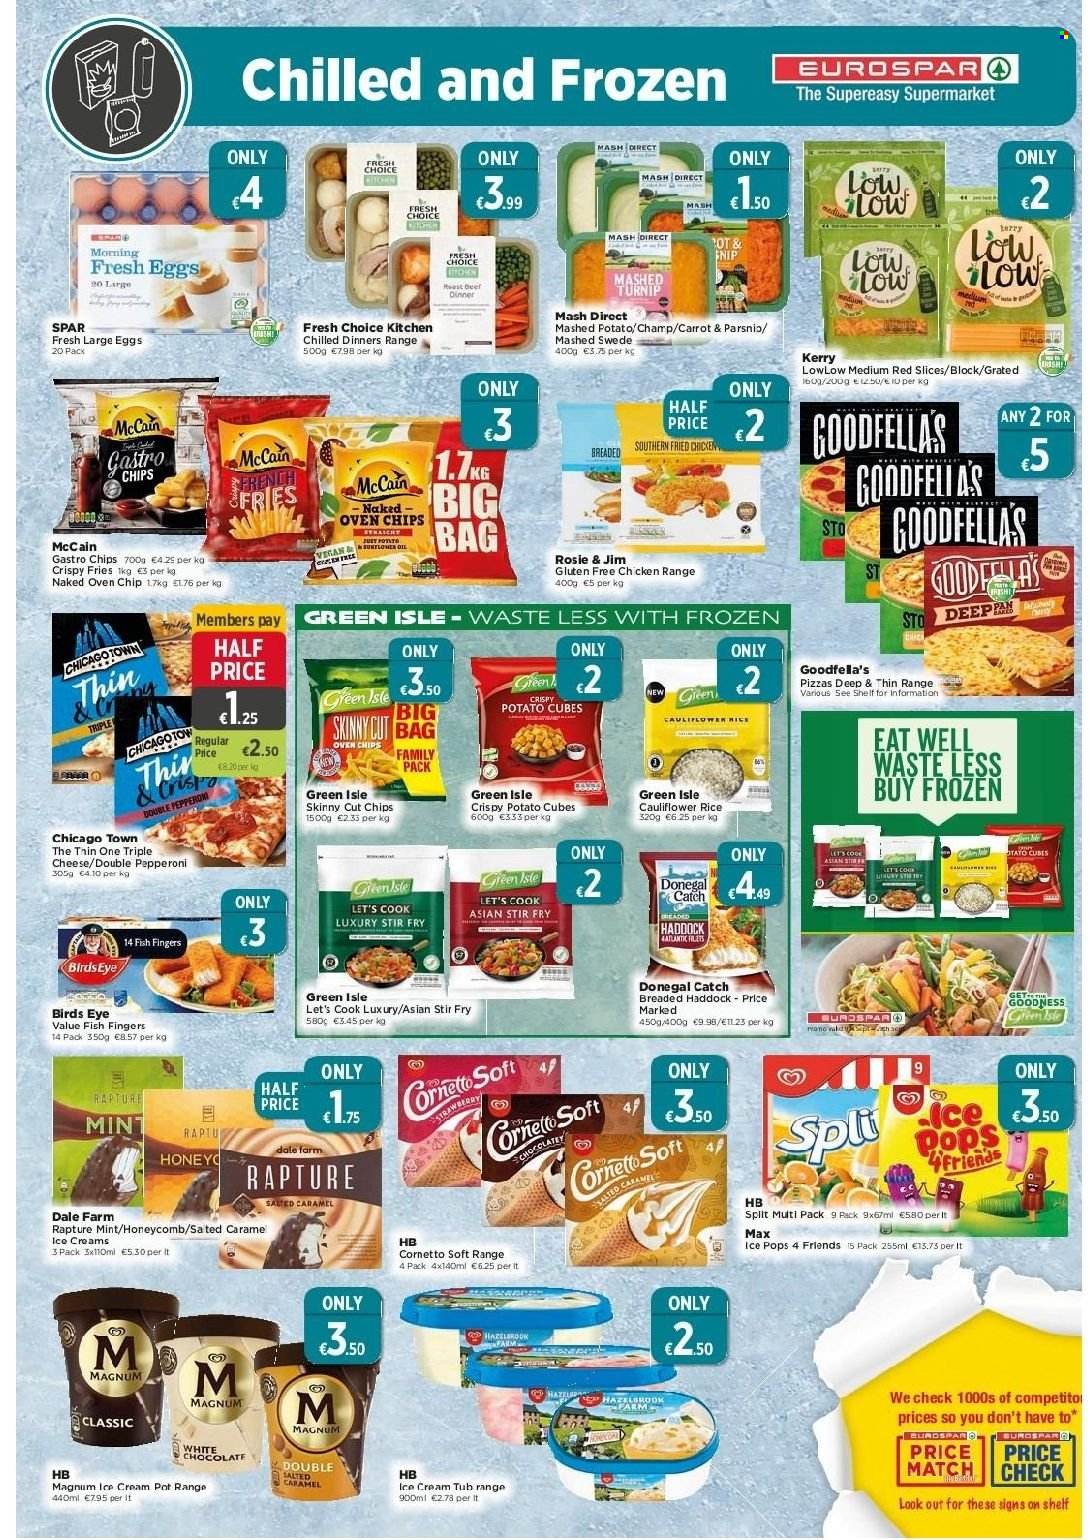 thumbnail - EUROSPAR offer  - 09.09.2021 - 29.09.2021 - Sales products - haddock, fish, fish fingers, fish sticks, pizza, fried chicken, Bird's Eye, Fresh Choice Kitchen, pepperoni, cheese, large eggs, ice cream, Cornetto, Donegal Catch, McCain, potato fries, frozen chips, white chocolate, oil, bag. Page 5.